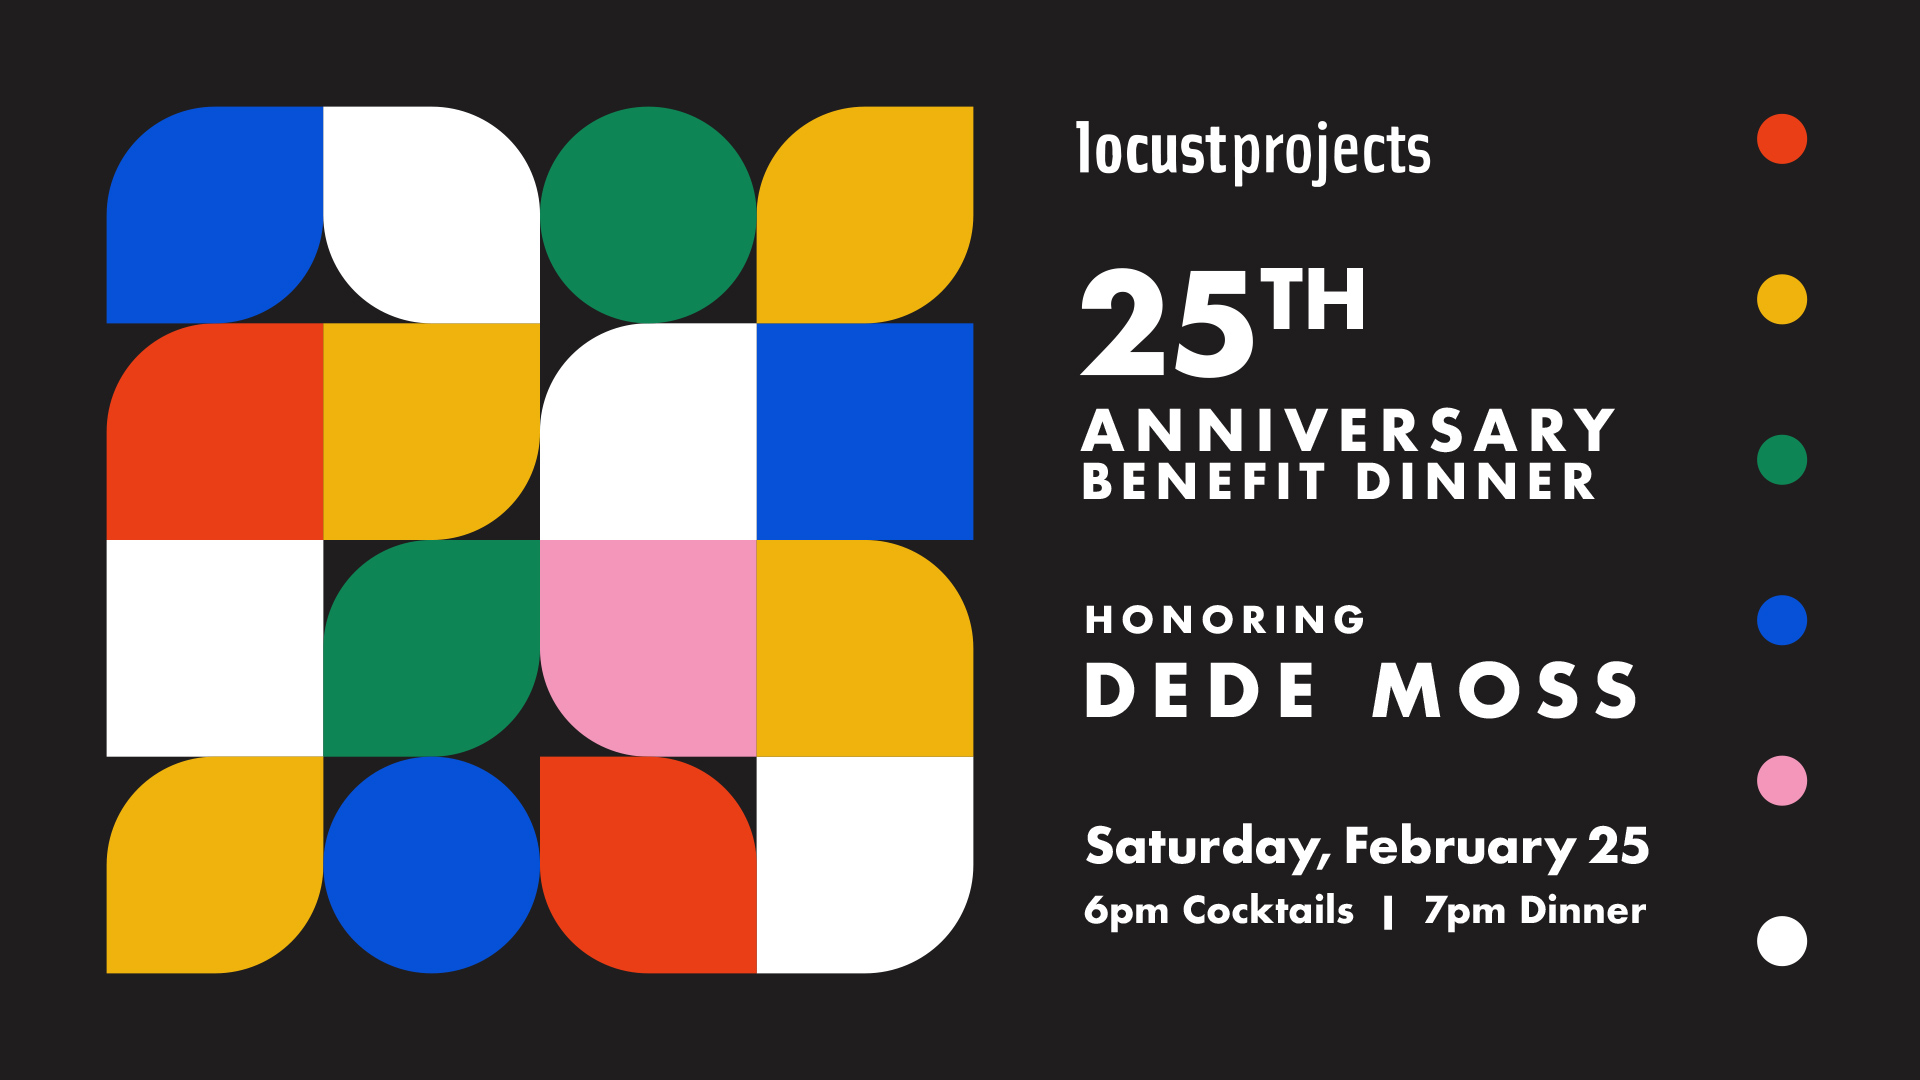 25th Anniversary Annual Benefit Dinner Honoring Dede Moss